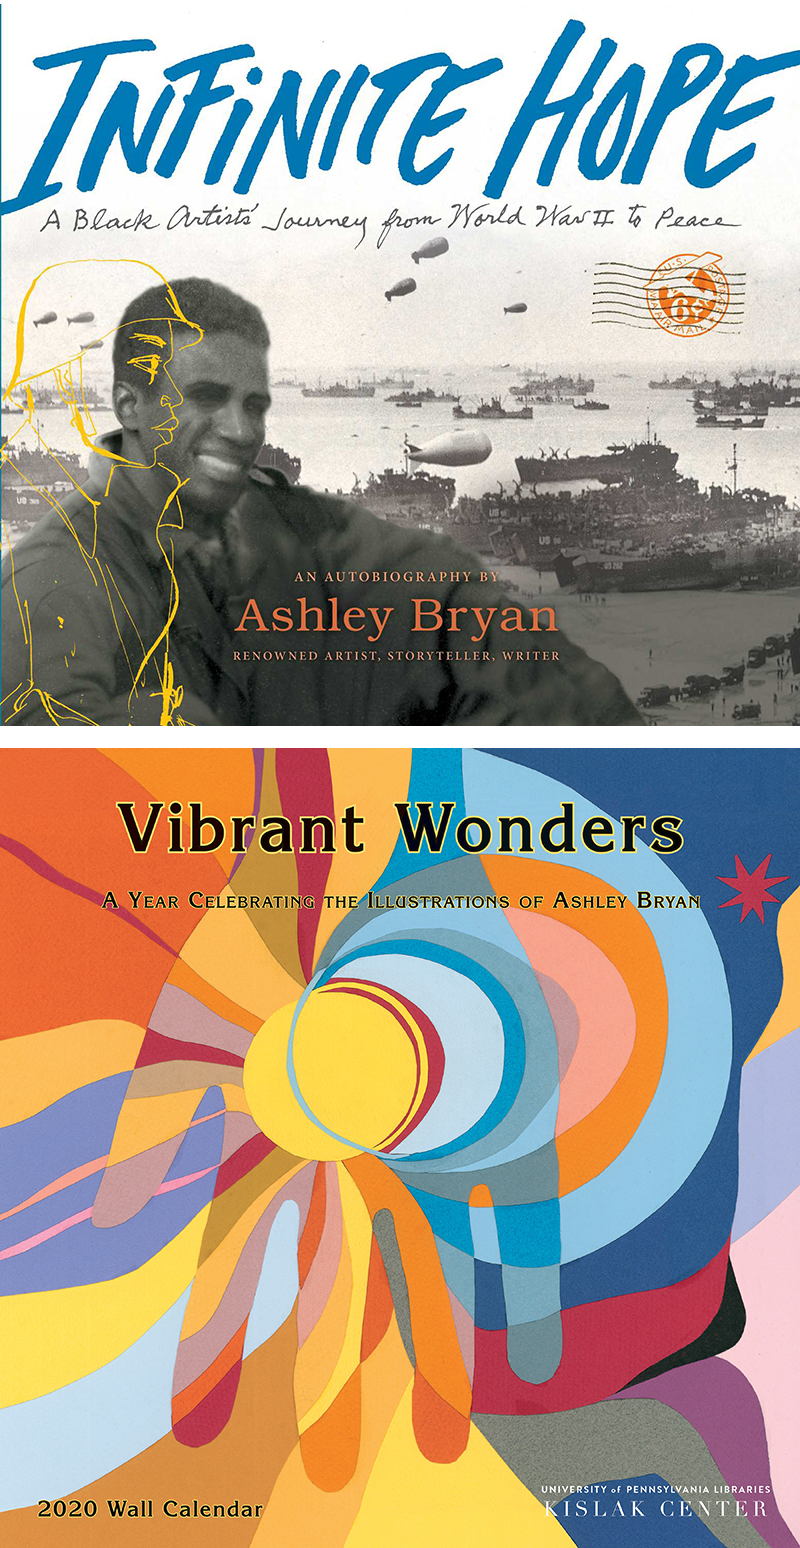 Cover of Ashley Bryan's autobiography Infinite hope featureing a black and white photograph of him as a young soldier in WWII with a line sketch of a soldier overlayed in yellow. And the cover of Vibrant Wonders featuring Ashley Bryan's color paper collage of a hand with a swirling sun motif